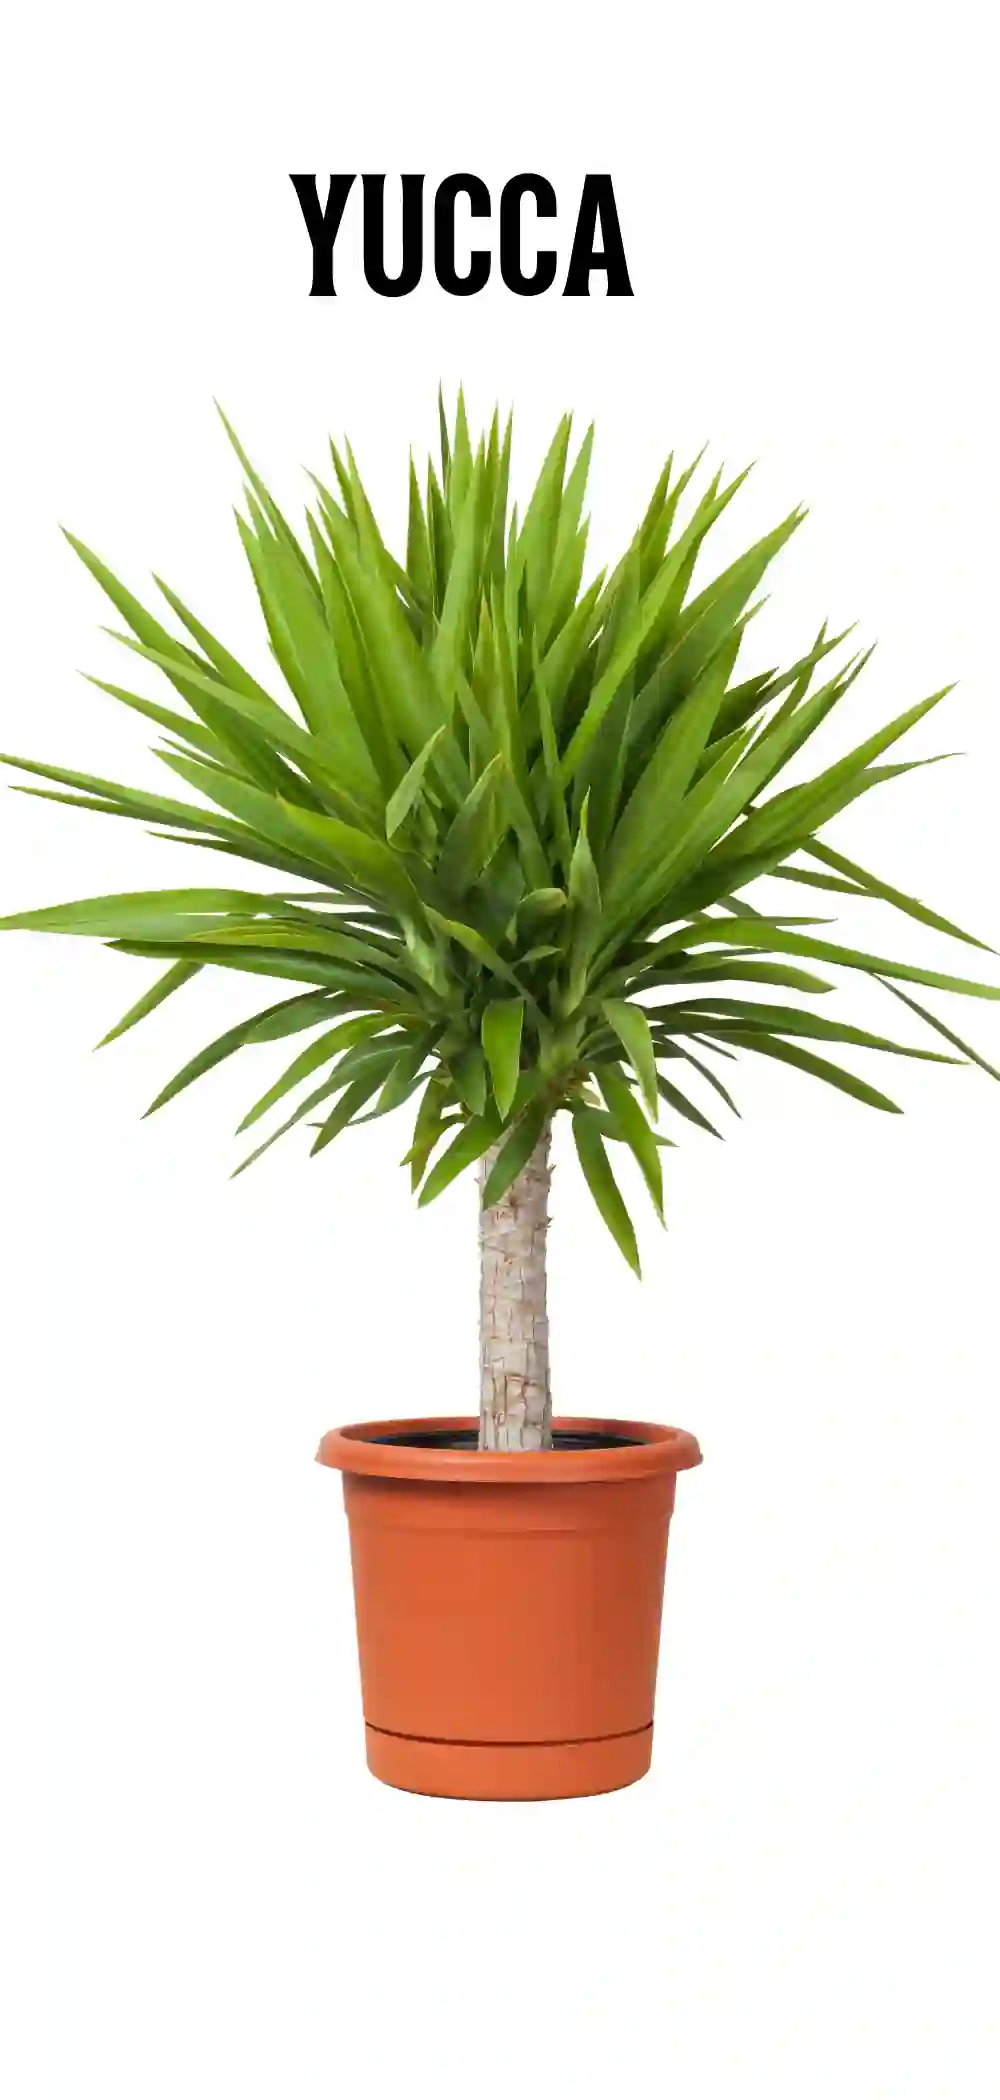 Image of an Yucca Plant